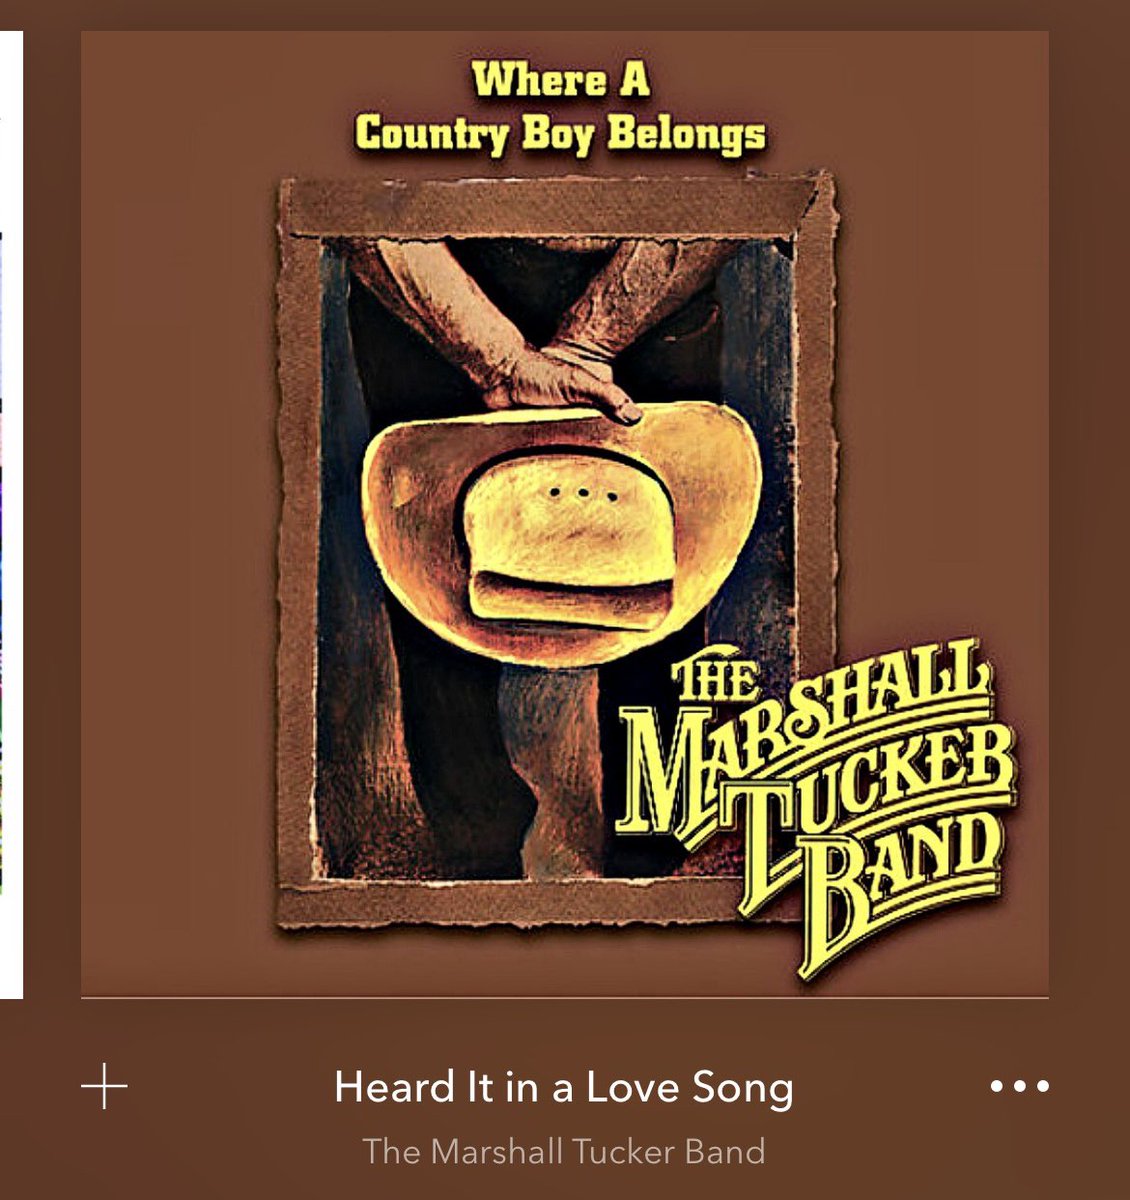 Not yacht rock, obviously, but I loved this song when I was a kid and had it in my mind that the title was “Purty Little Love Song”